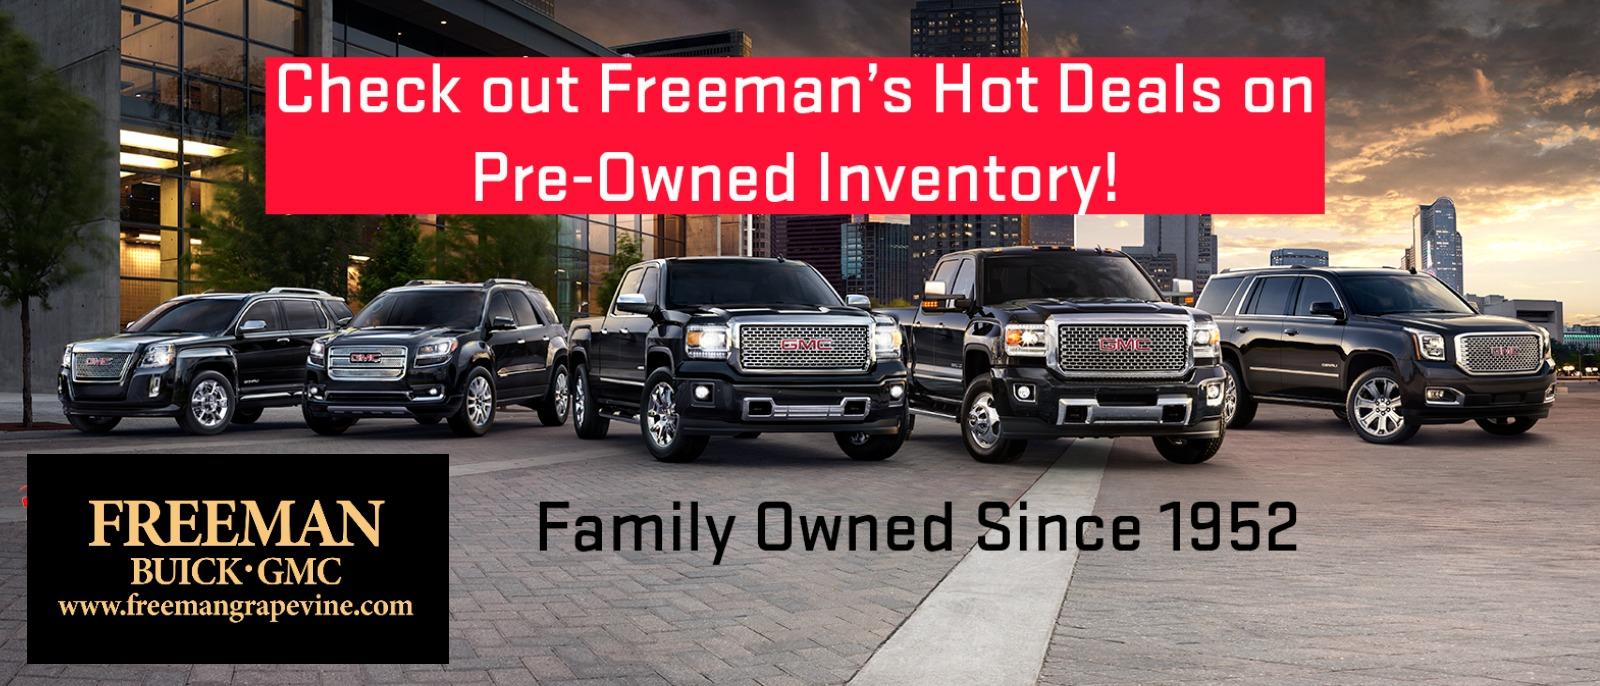 Come See Freeman's Hot Deals on Pre-Owned Inventory!